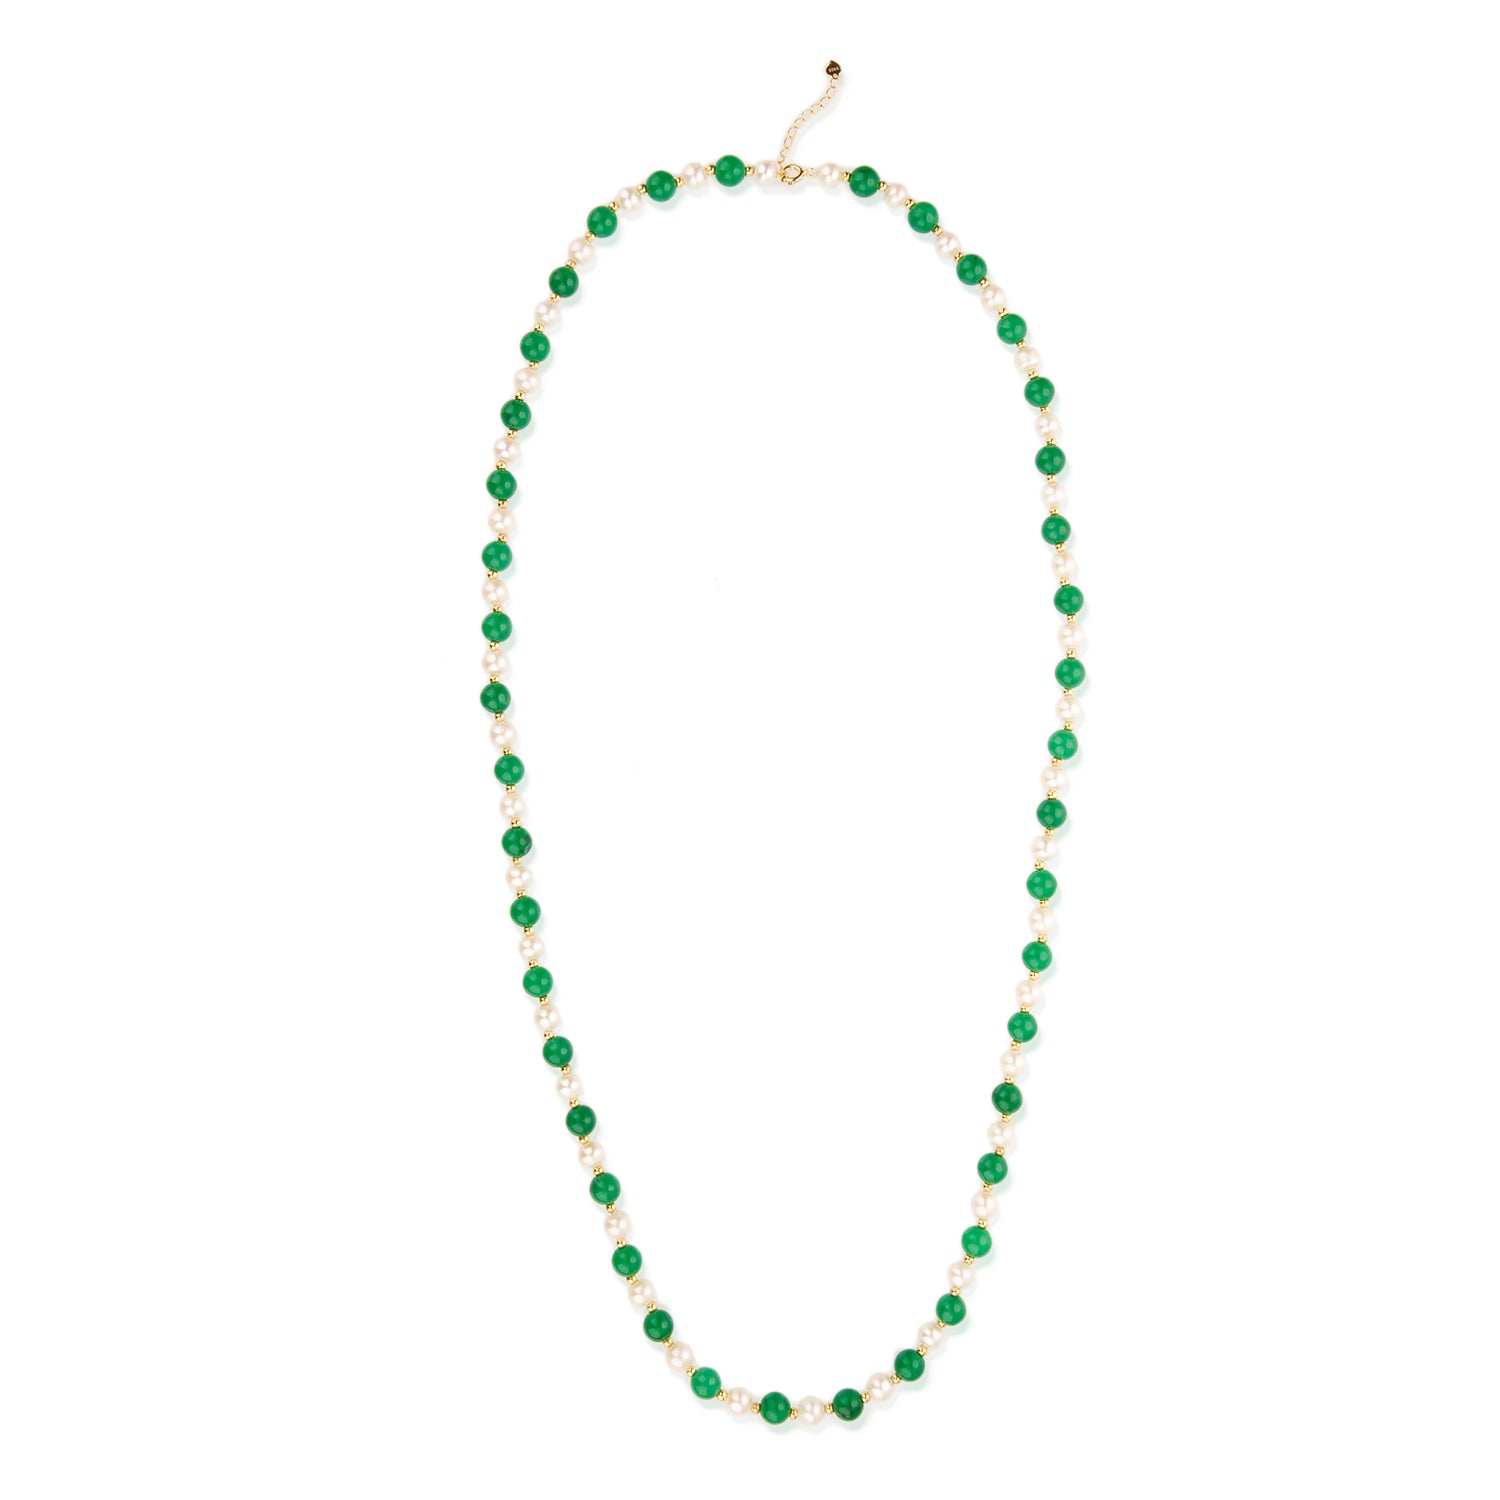 【Chalcedony】7MM S925 Pearl Jade Necklace